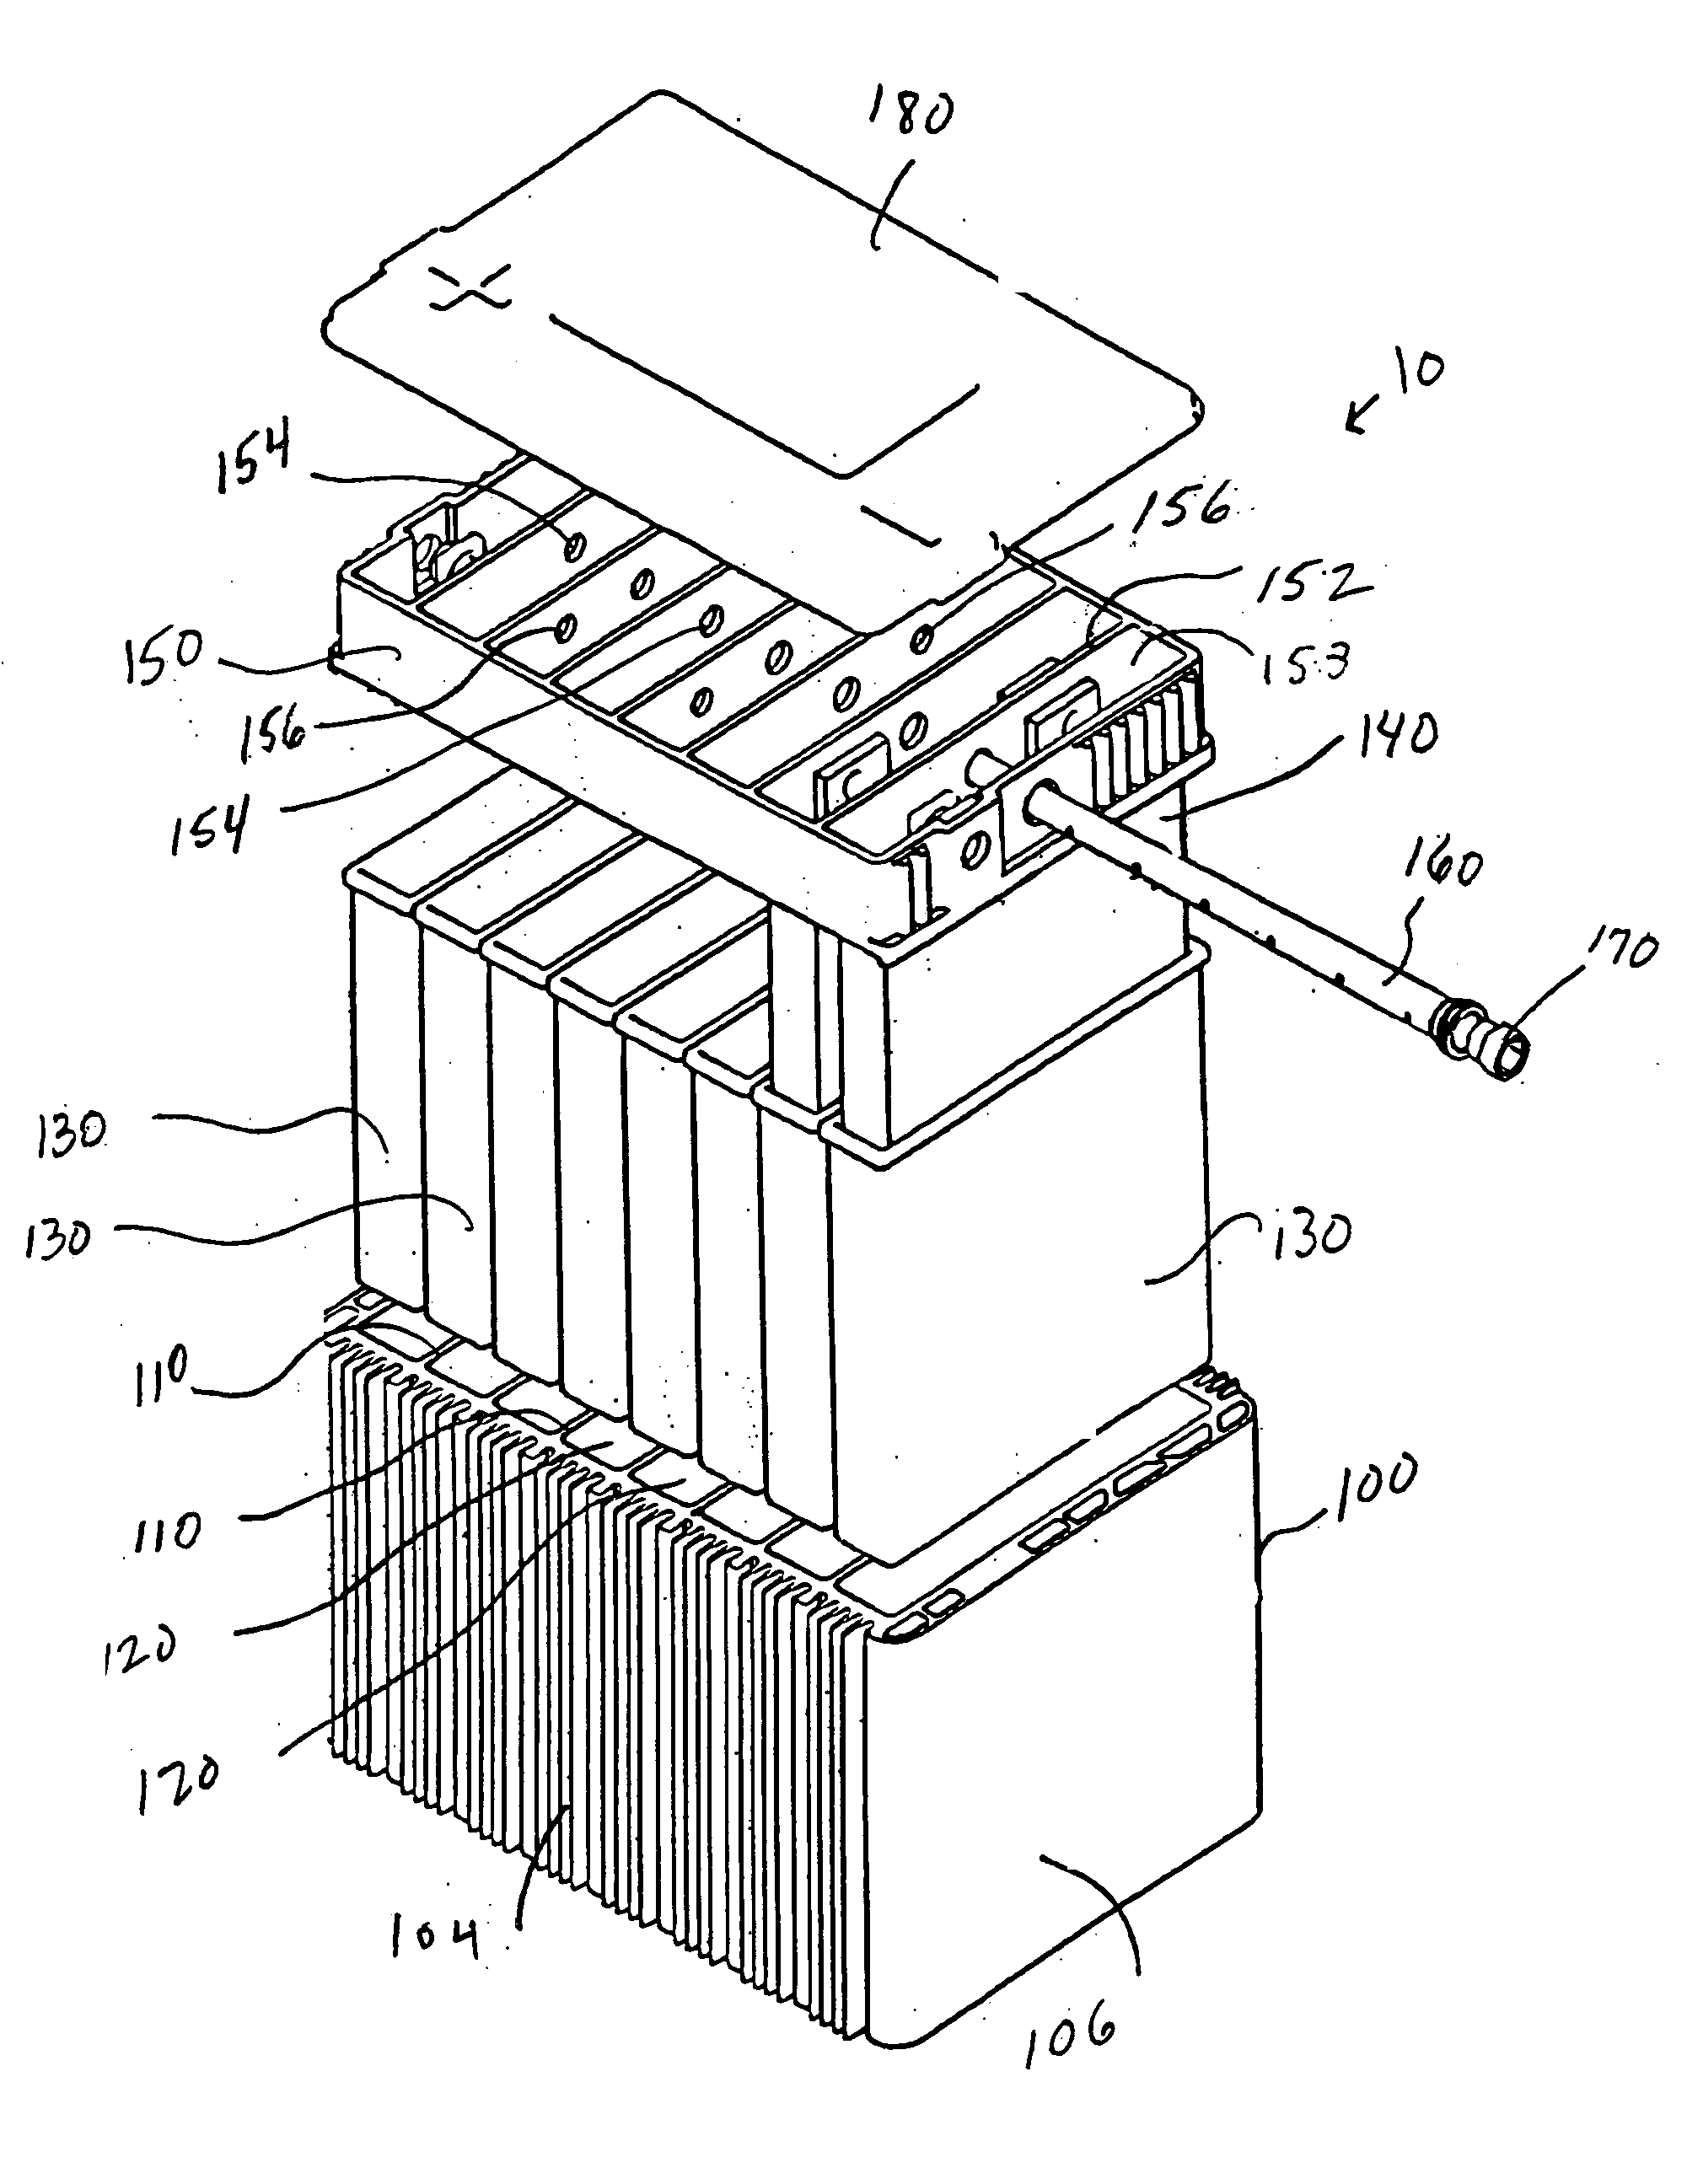 Battery assembly with heat sink